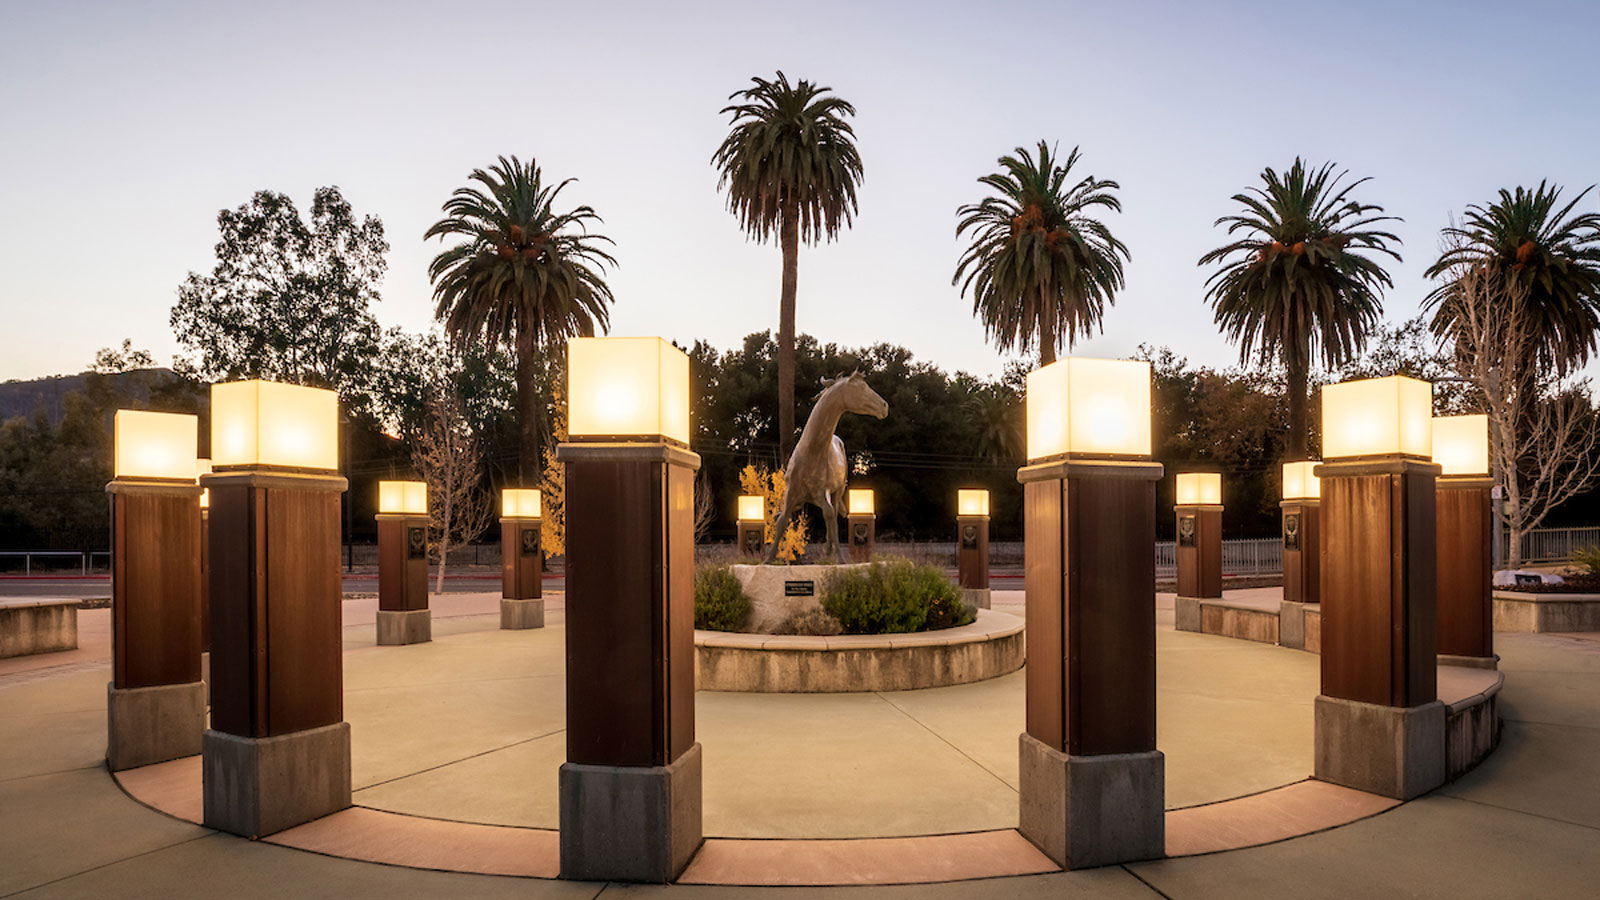 Mustang Memorial Plaza on campus